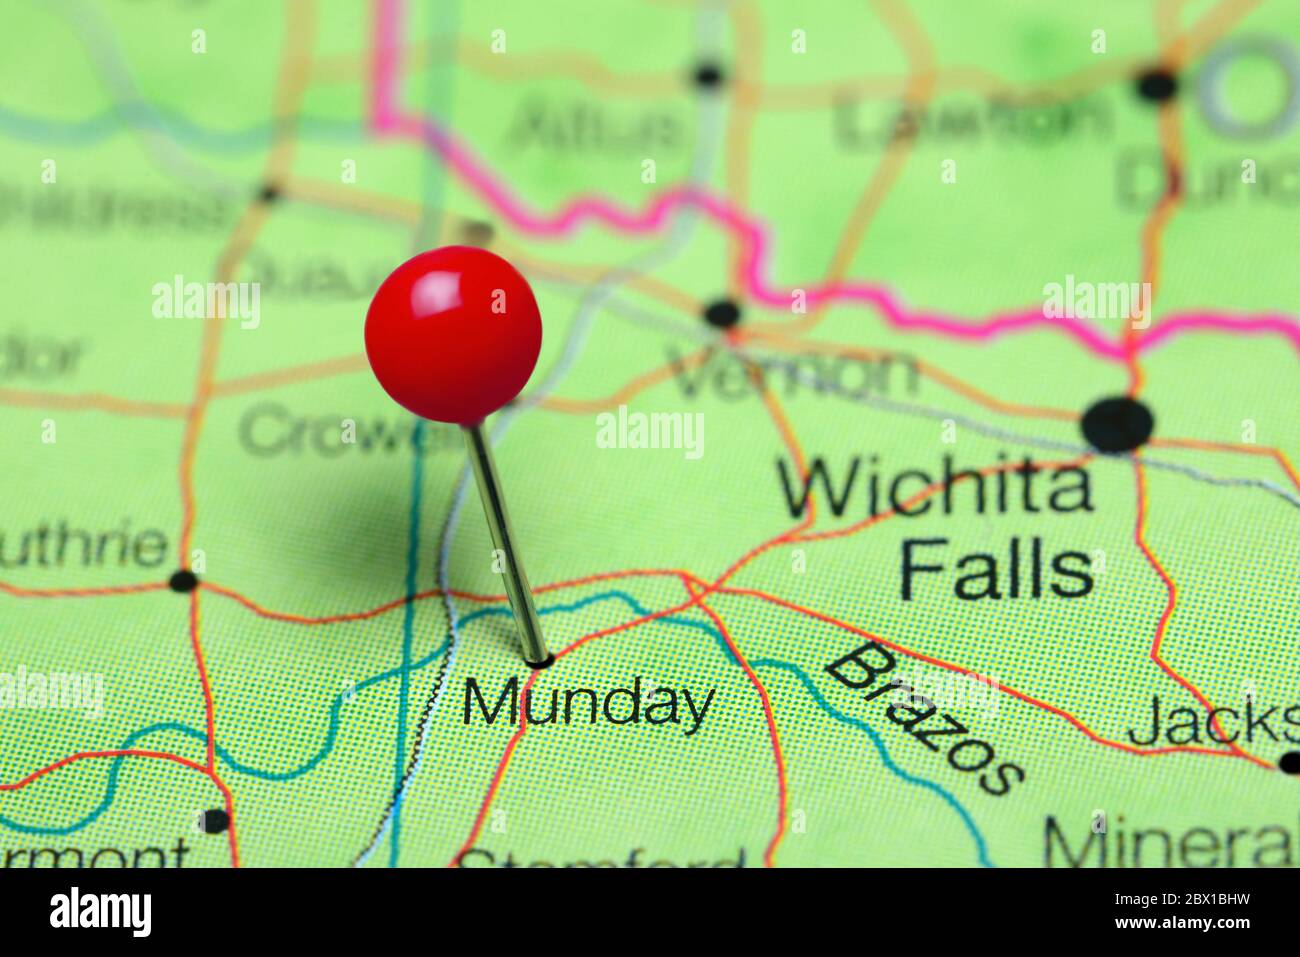 Munday pinned on a map of Texas, USA Stock Photo